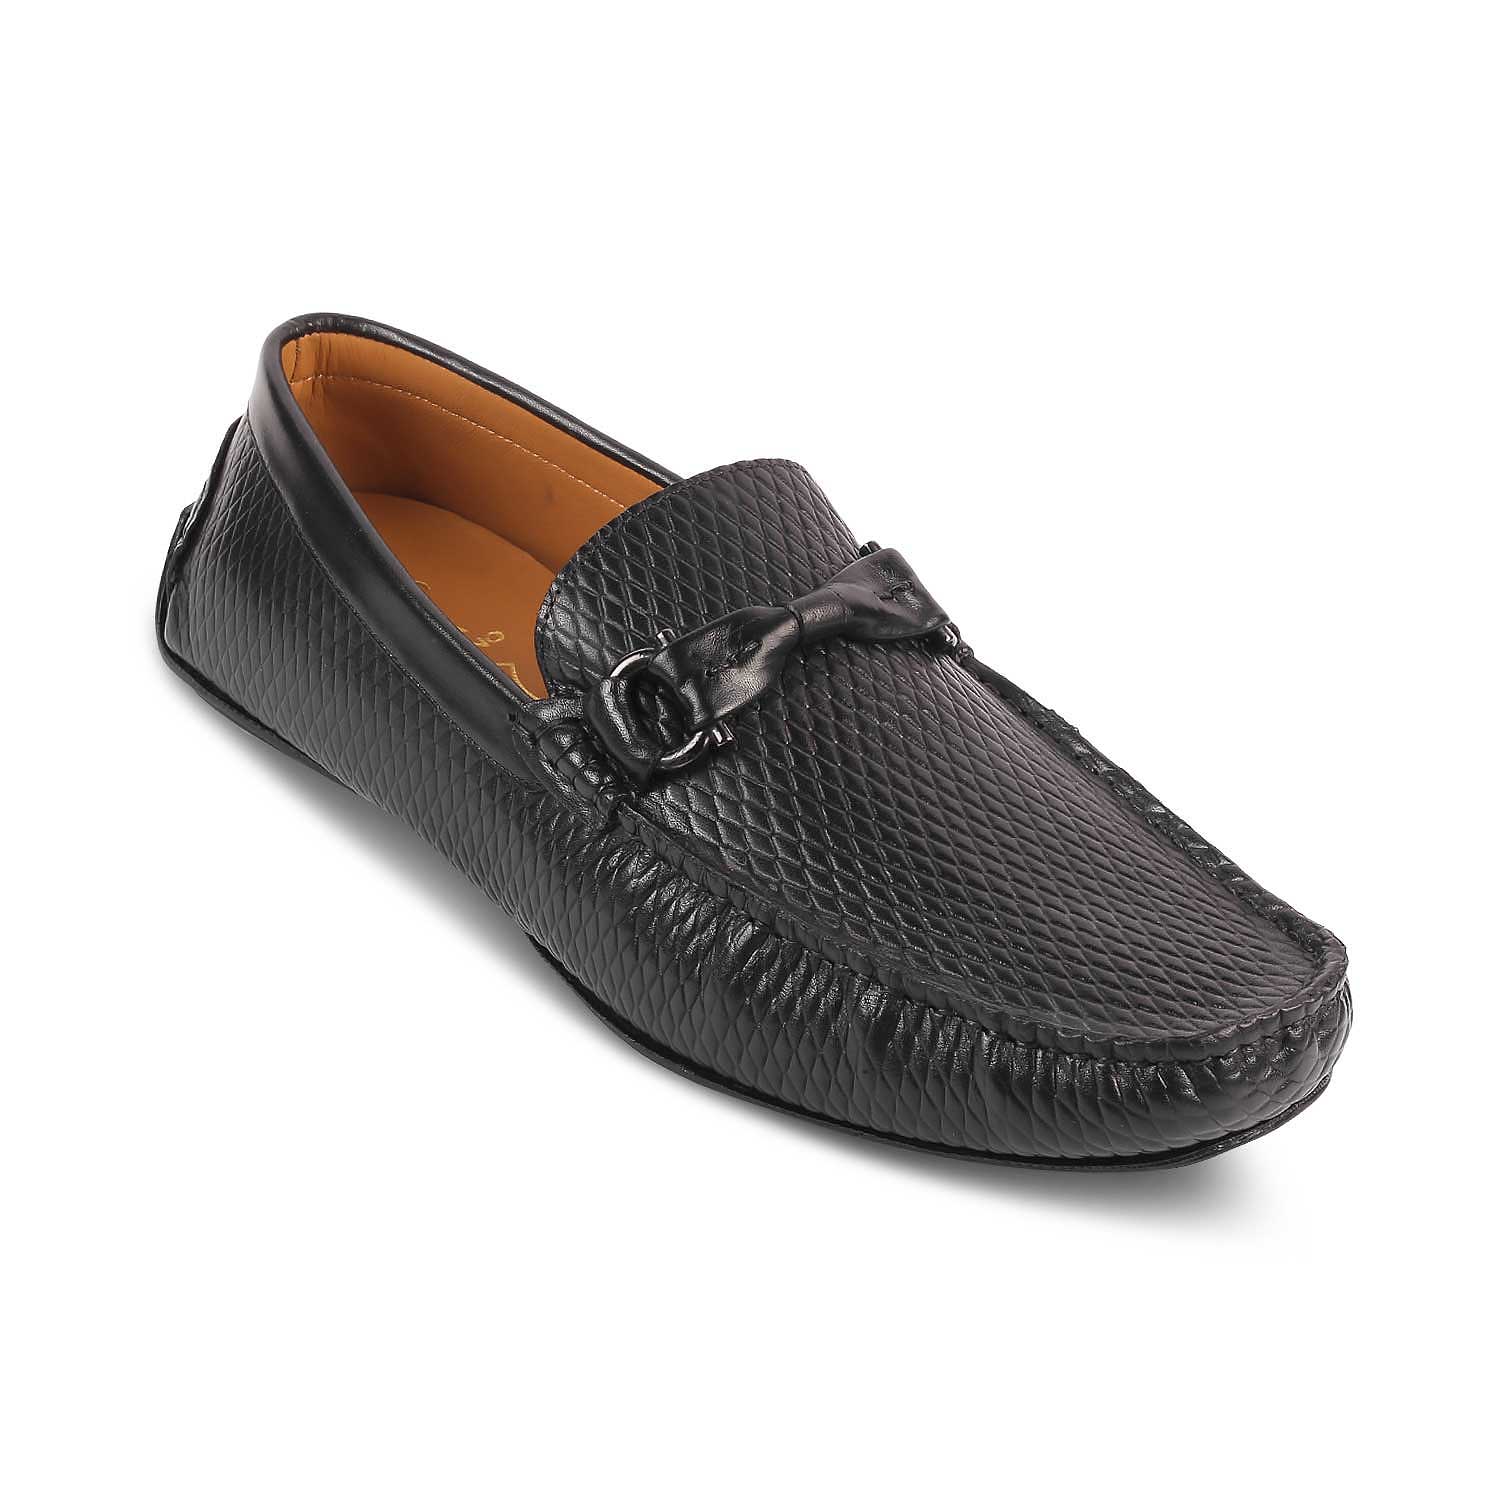 The Cover Black Men's Leather Driving Loafers Tresmode - Tresmode